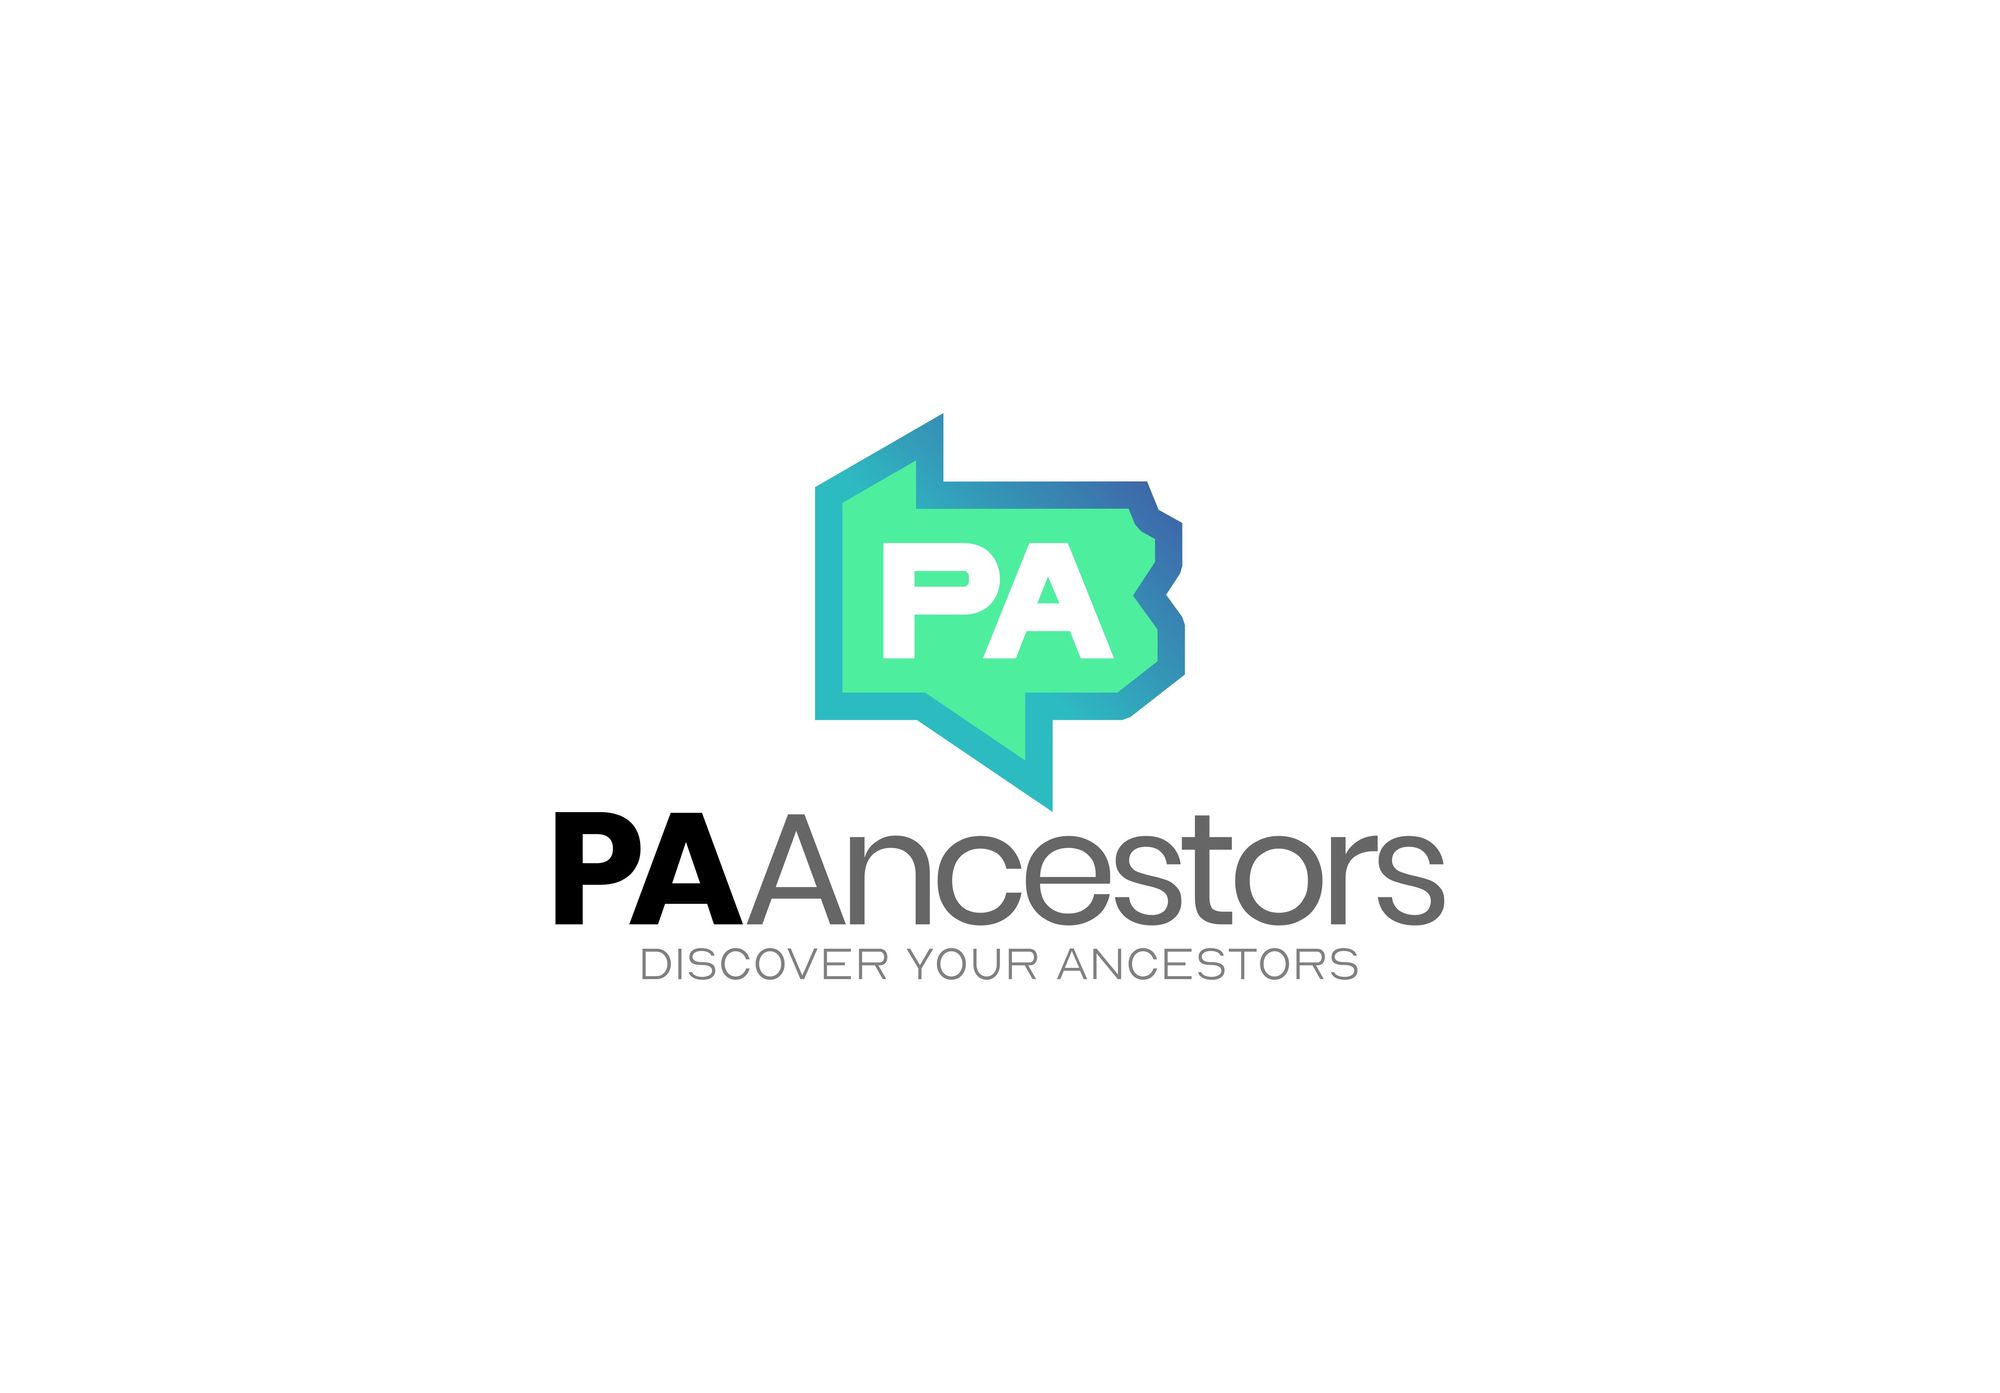 What PA Ancestors is All About